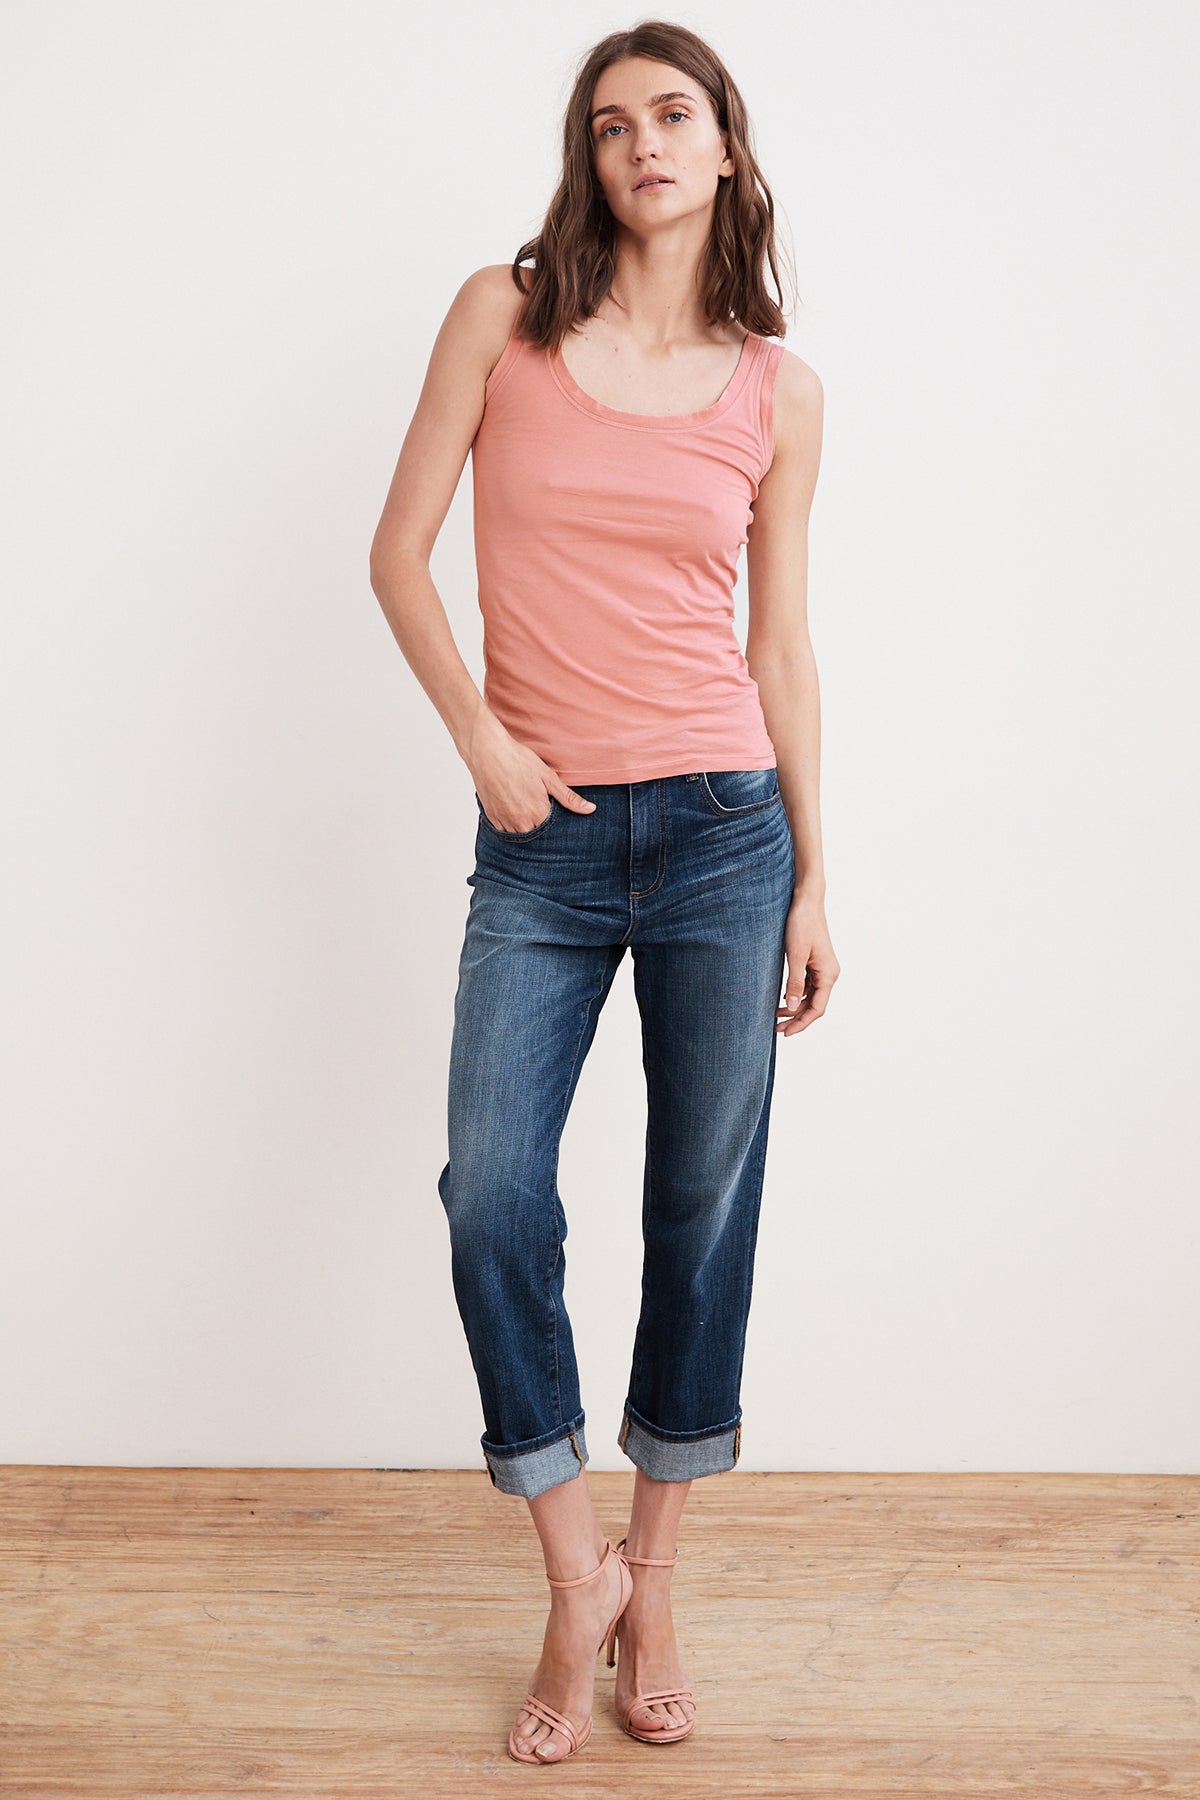   A woman wearing a MOSSY GAUZY WHISPER FITTED TANK in pink from Velvet by Graham & Spencer. Additionally, she is wearing jeans. 